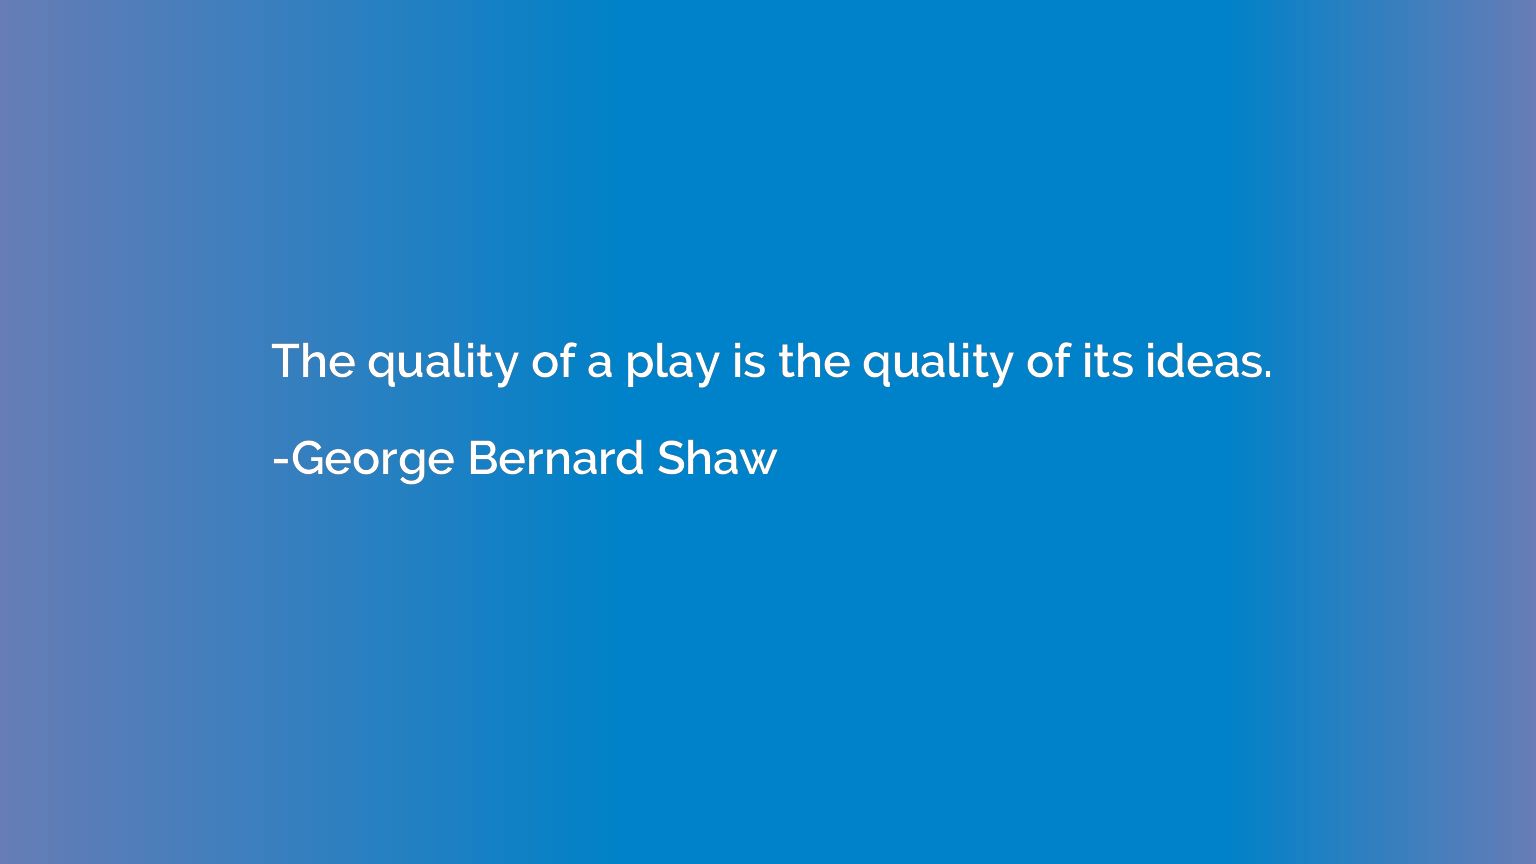 The quality of a play is the quality of its ideas.